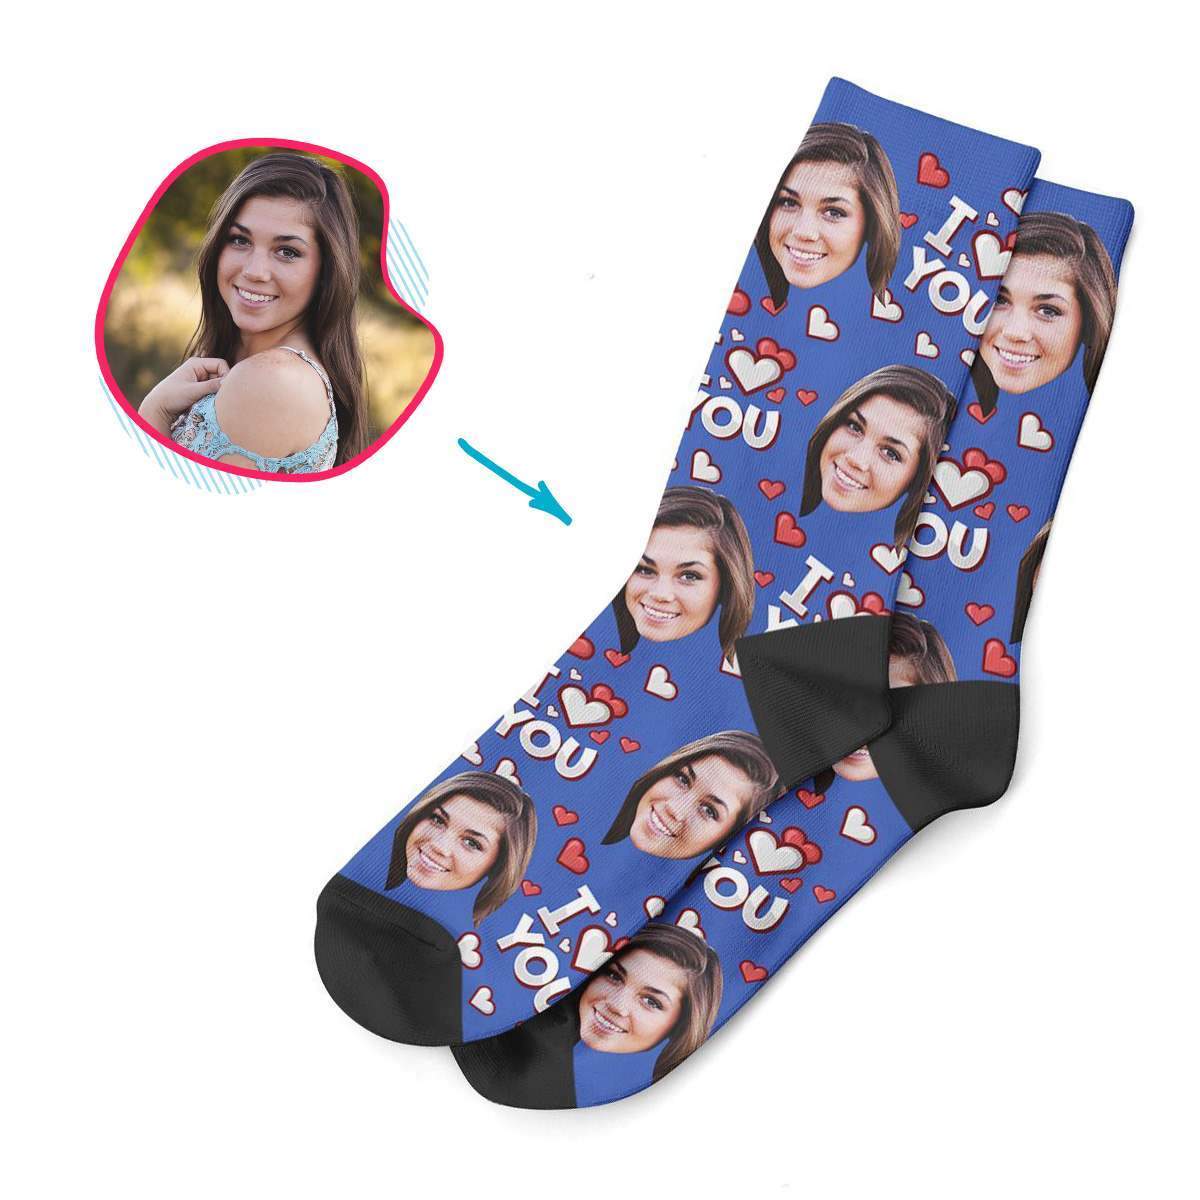 darkblue I Love You socks personalized with photo of face printed on them